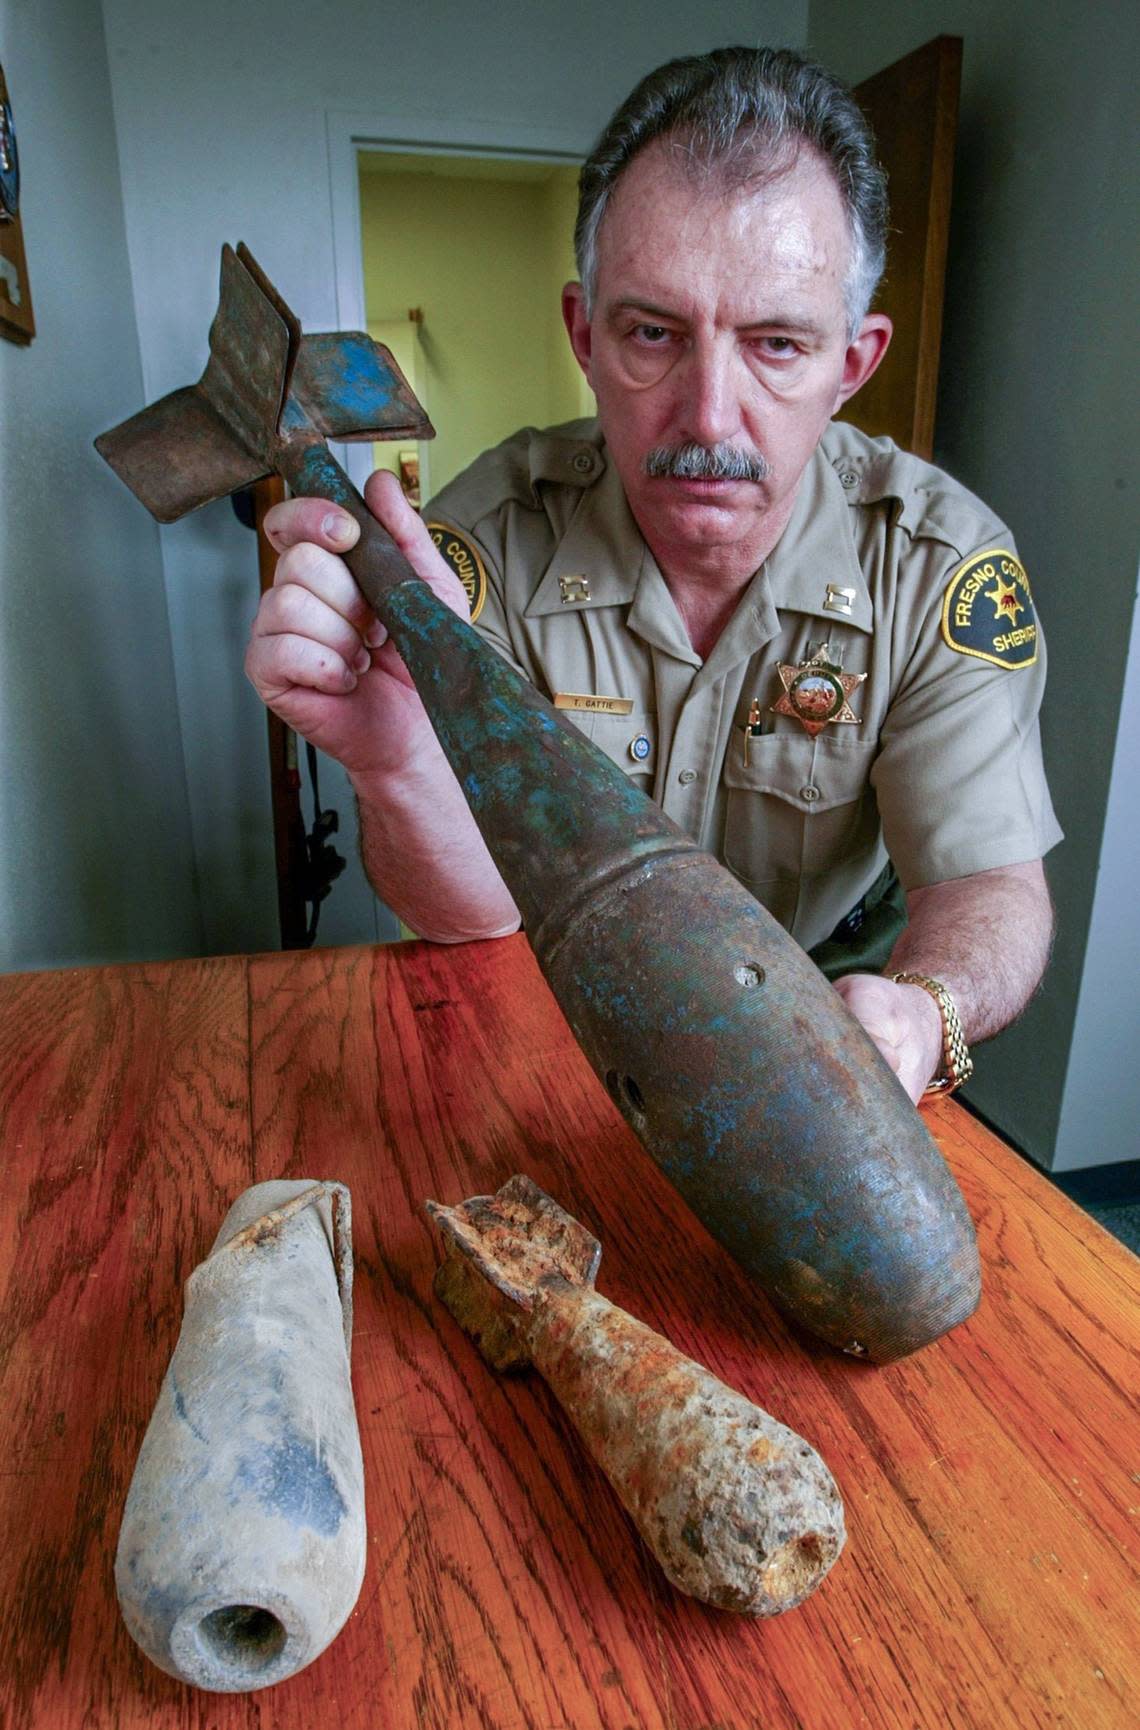 FRESNO,CA 2-4-2004- MTD JRW WWII BOMBS - Fresno County Sheriff Department Captain Tom Gattie shows three World War II practice bombs which were unearthed in the Bonadelle Ranchos subdivision in Madera County, which was the site of a training bombing site for warplane drills (ck) during the war. The one at left, a 13-pound lead bomb, is the one most recently discovered by a man discing with a tractor, which cut off the tail fins. At middle is a 3-pound bomb, with the one at right that Gattie holds is a 25-pounder. (the one in middle and at right were found some years ago) JOHN WALKER/FRESNO BEE